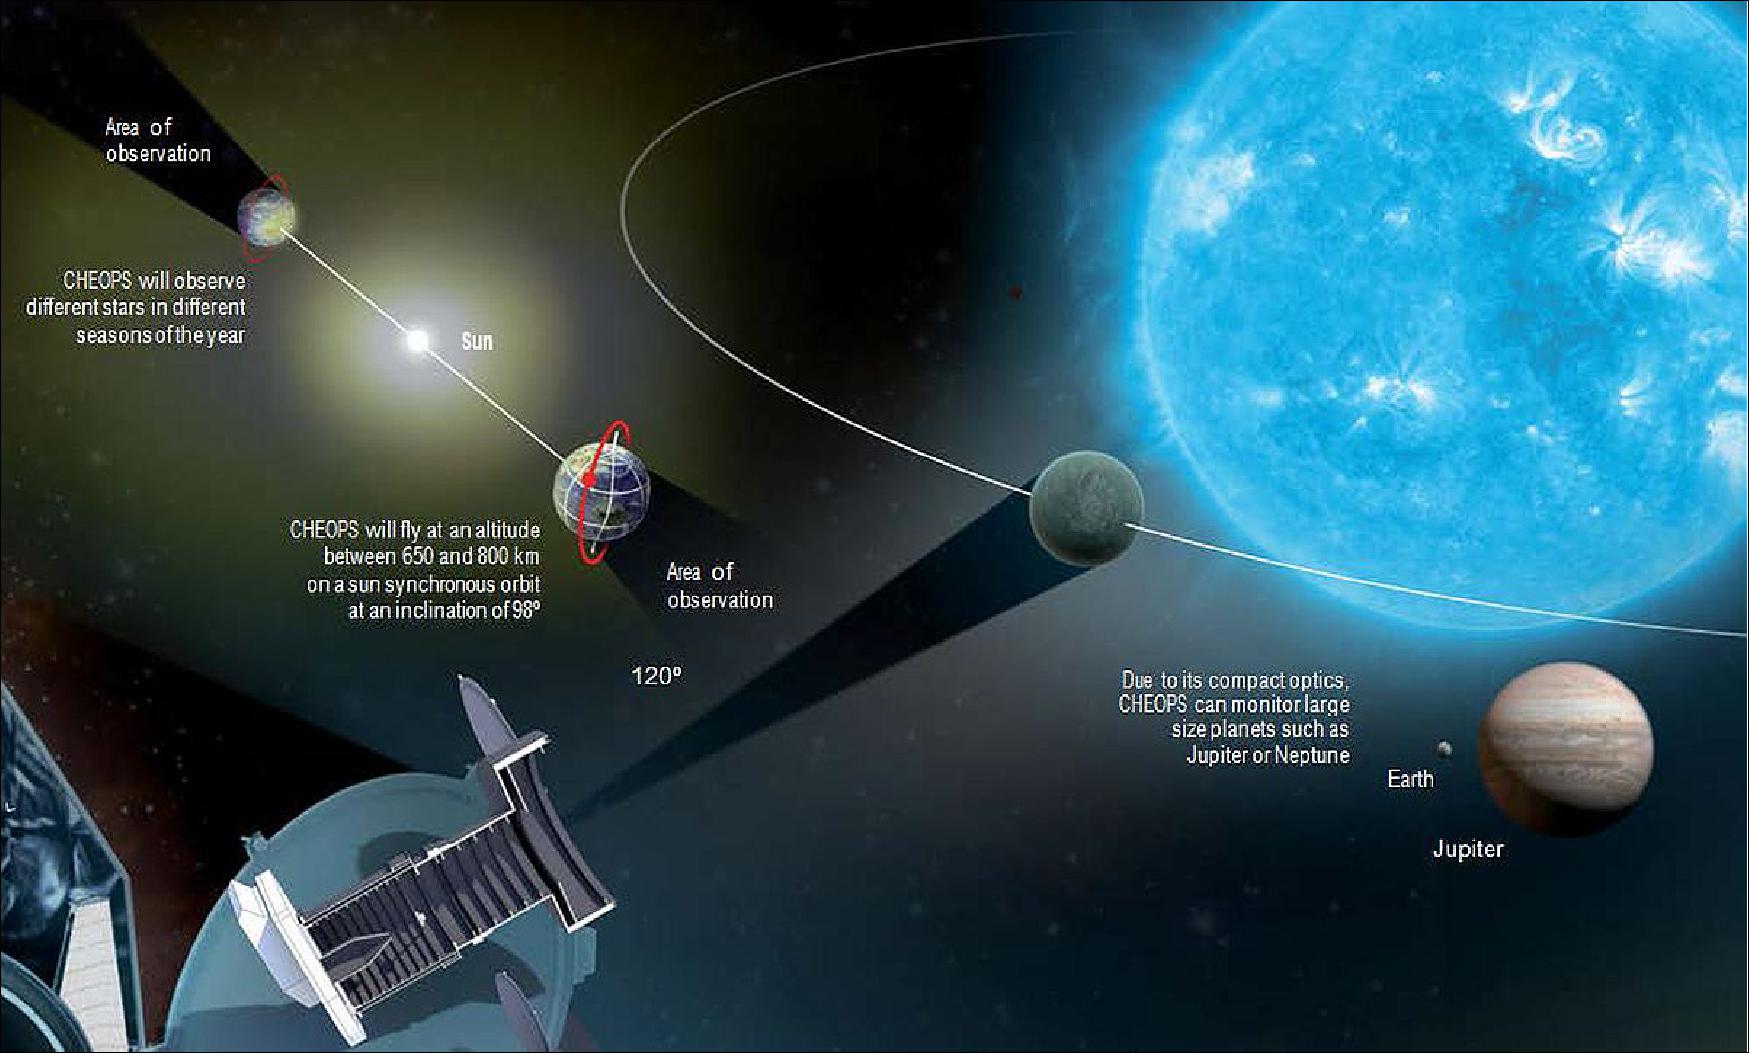 Figure 3: Illustration of the CHEOPS mission (image credit: Airbus DS, Ref. 12)